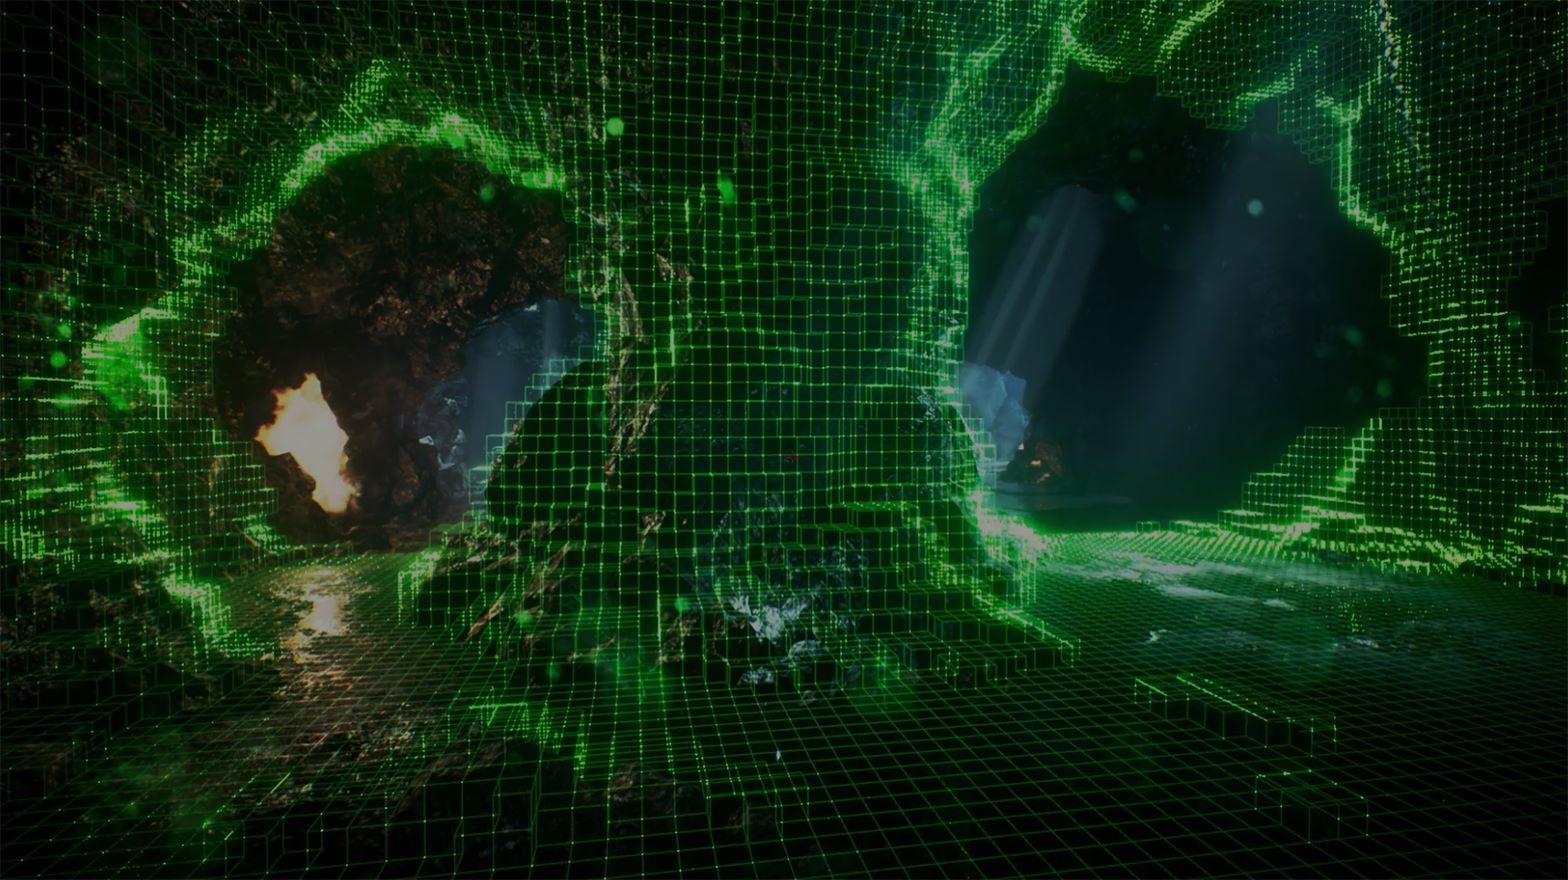 a landscape with a green computer grid overlayed over it